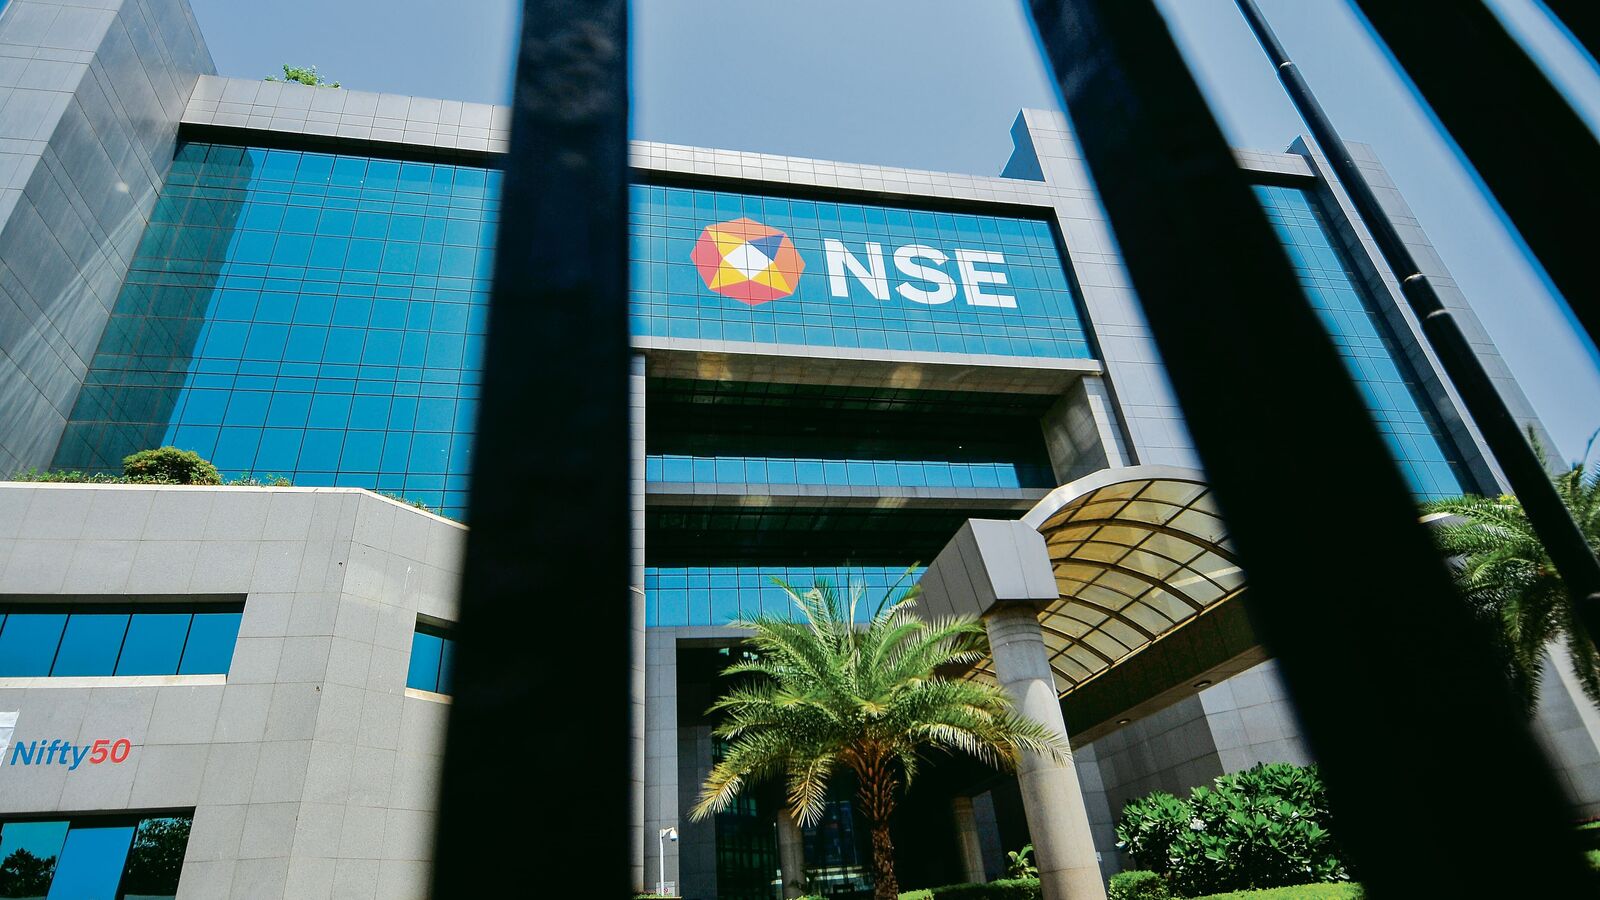 F&O trading on Nifty Next 50 index to start from next week: NSE | Mint - Mint